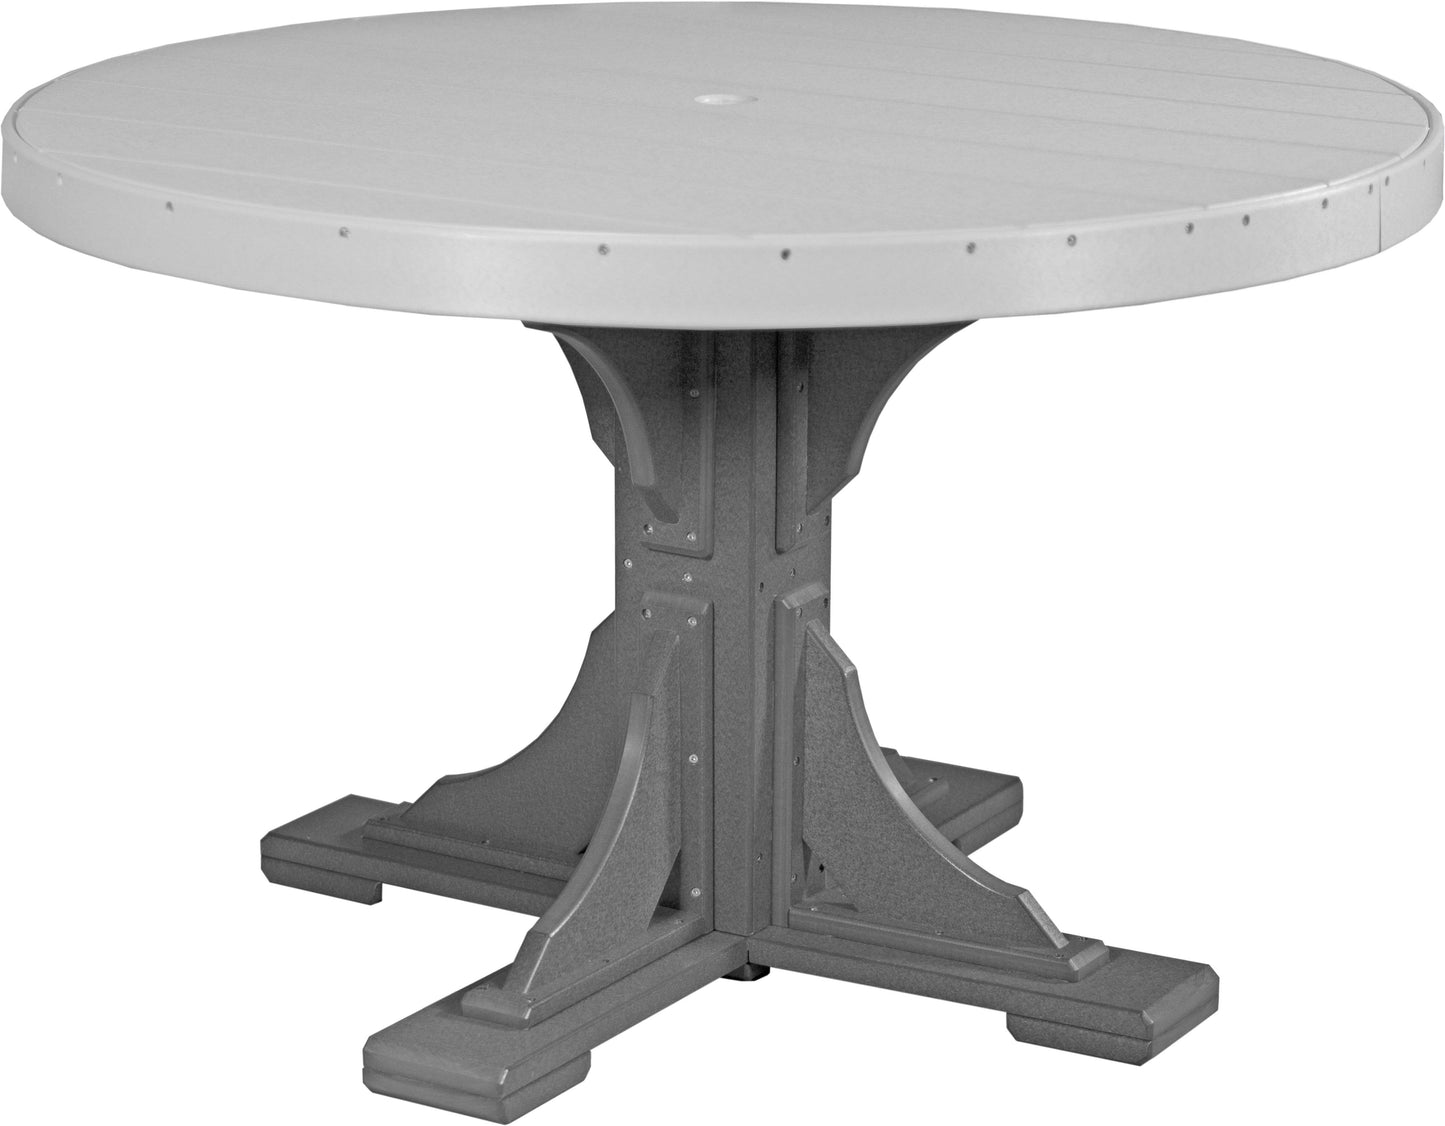 Luxcraft Recycled Plastic 4' Round Table (DINING HEIGHT) - LEAD TIME TO SHIP 3 TO 4 WEEKS